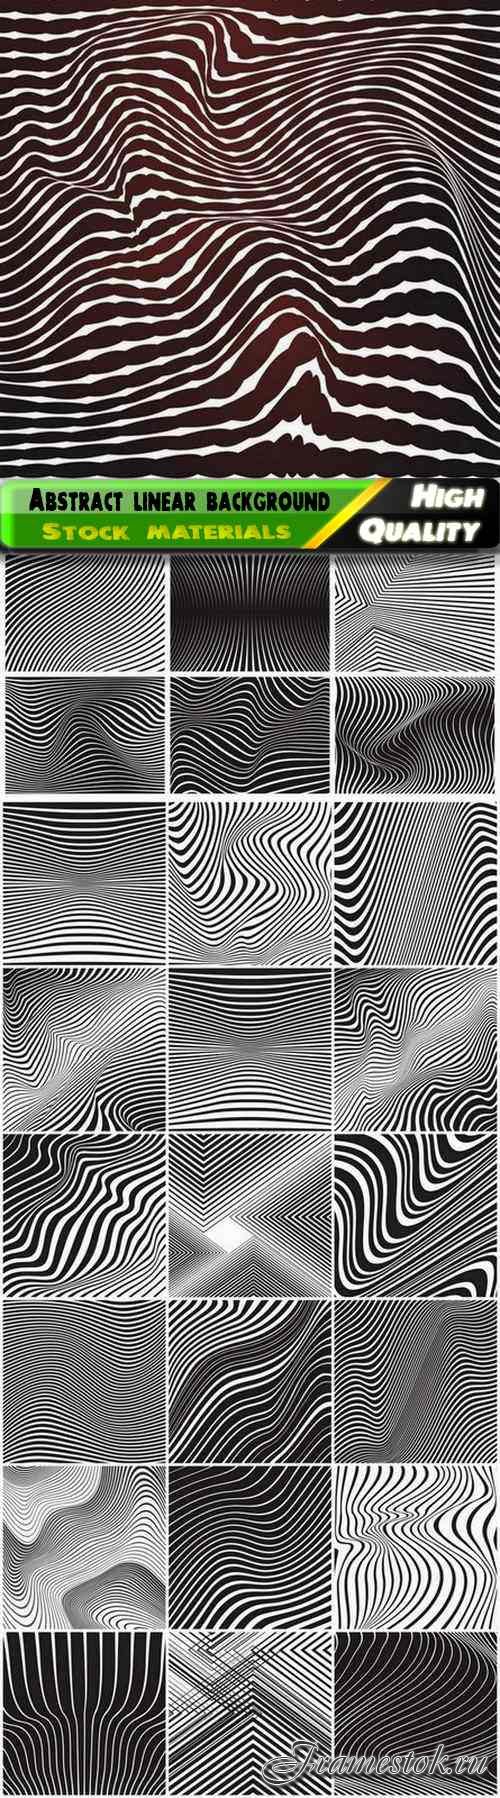 Abstract linear background with optical illusion creative art - 25 Eps